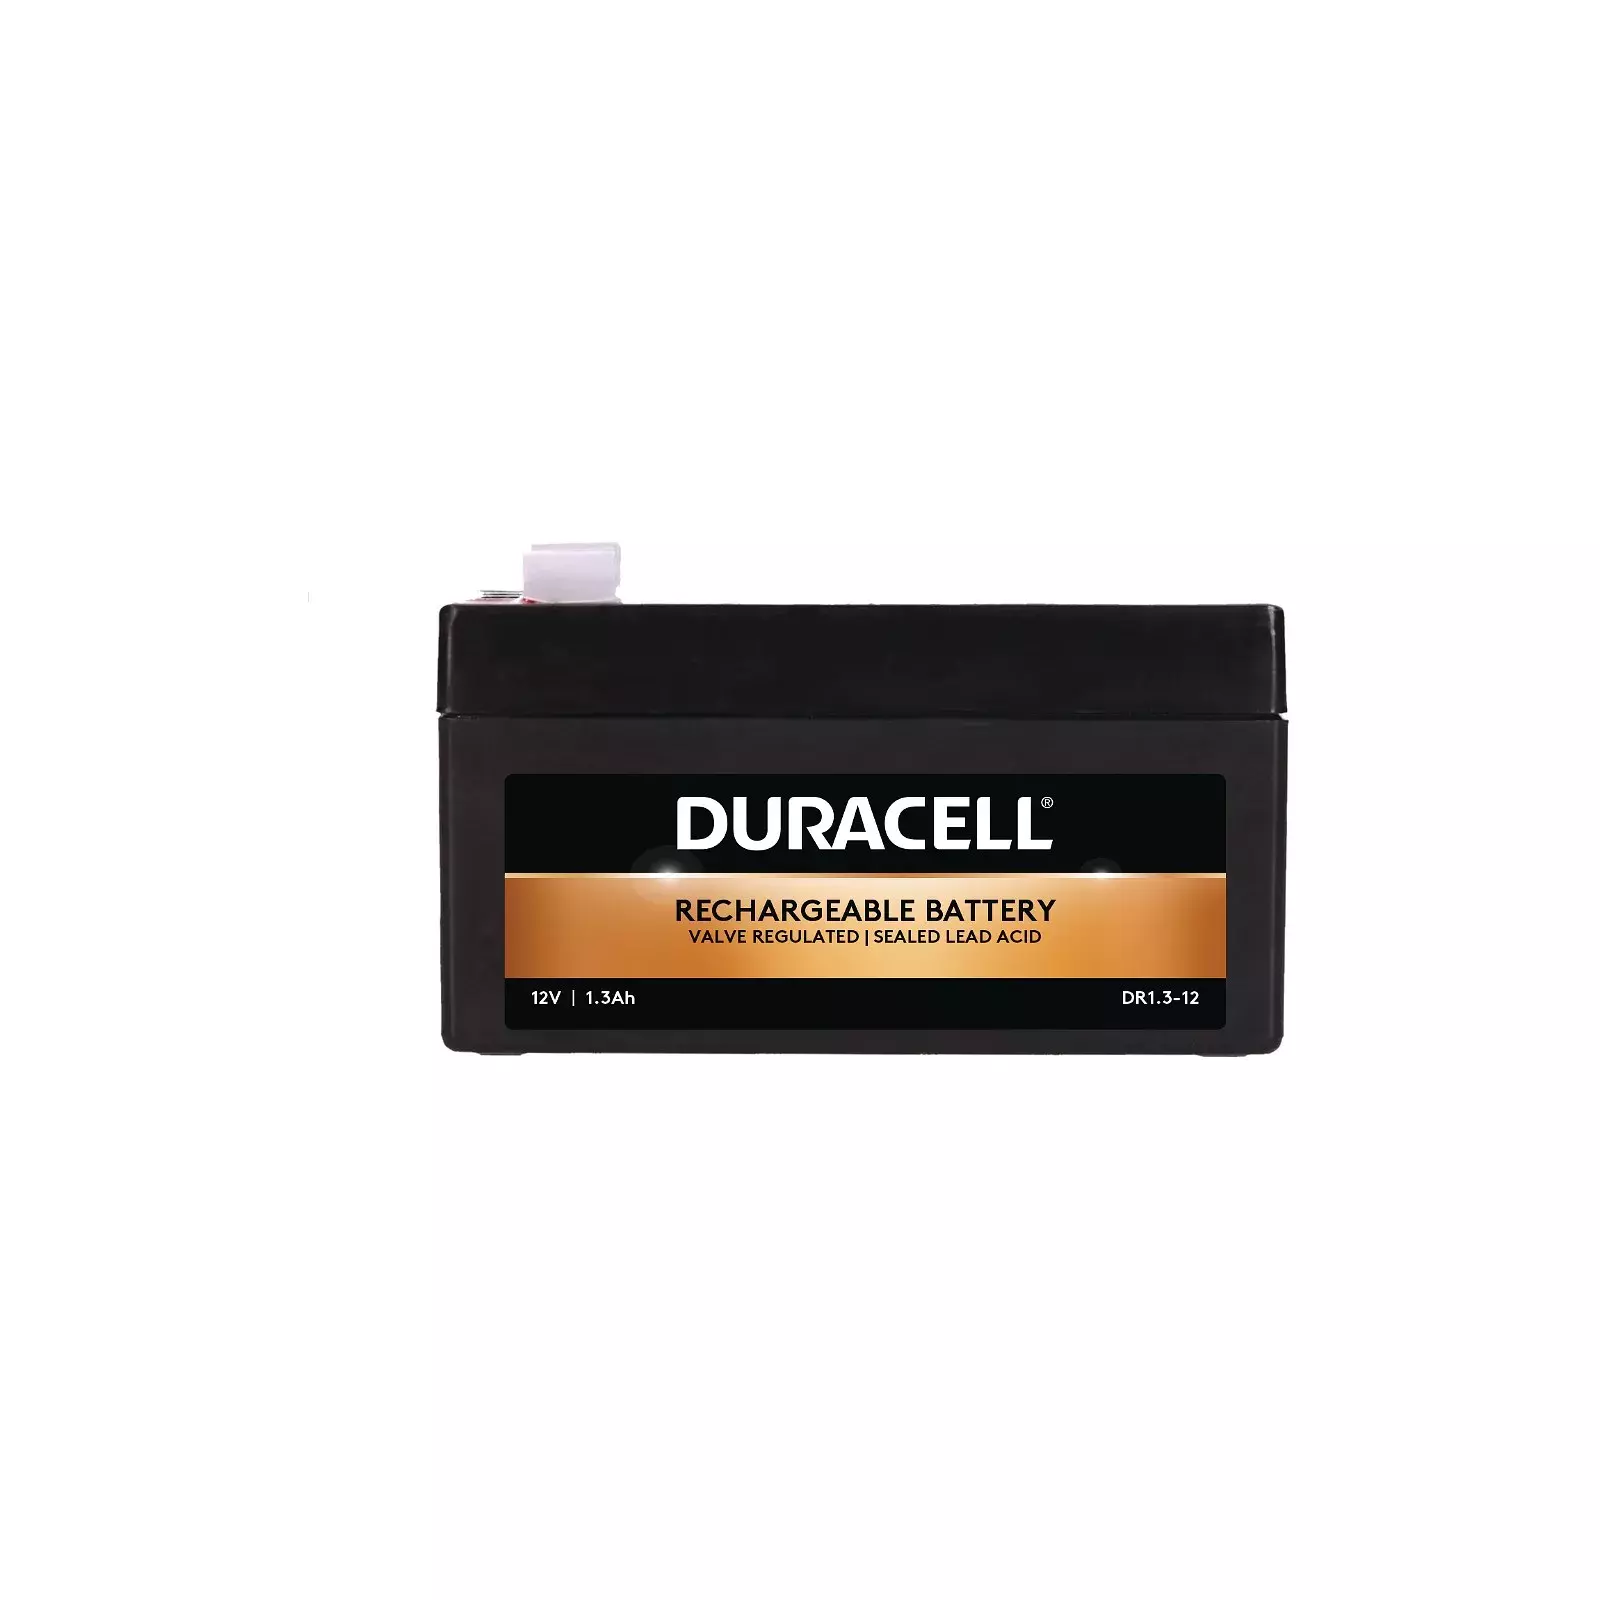 Duracell DR1.3-12 Photo 1